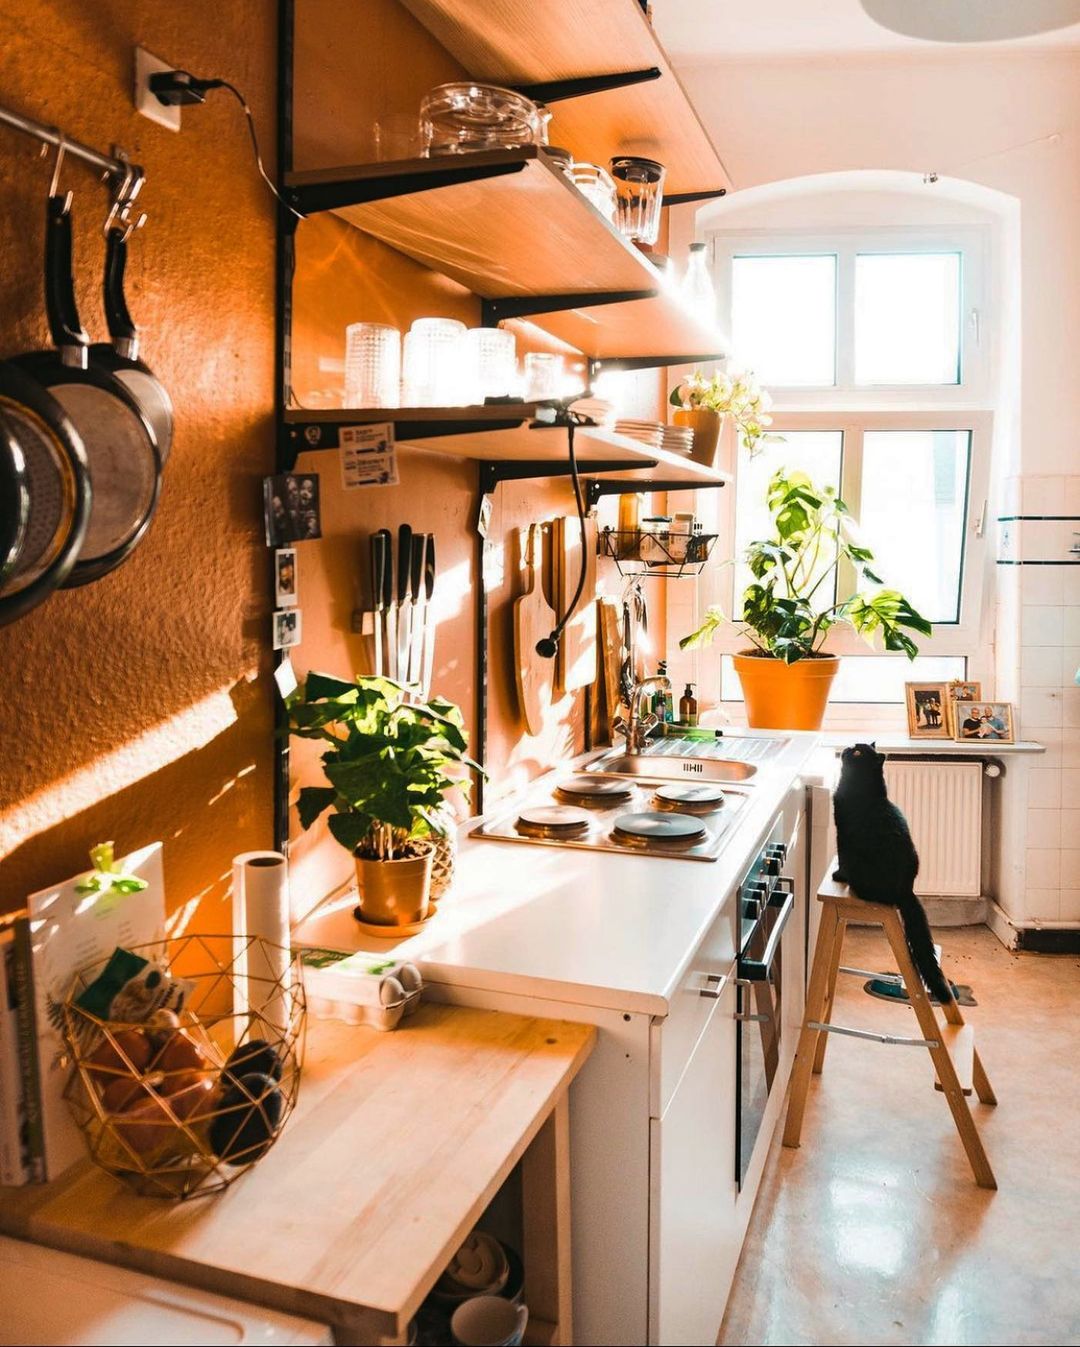 Small Kitchen with Lots of Vertical Storage. Photo by Instagram user @fridlaa